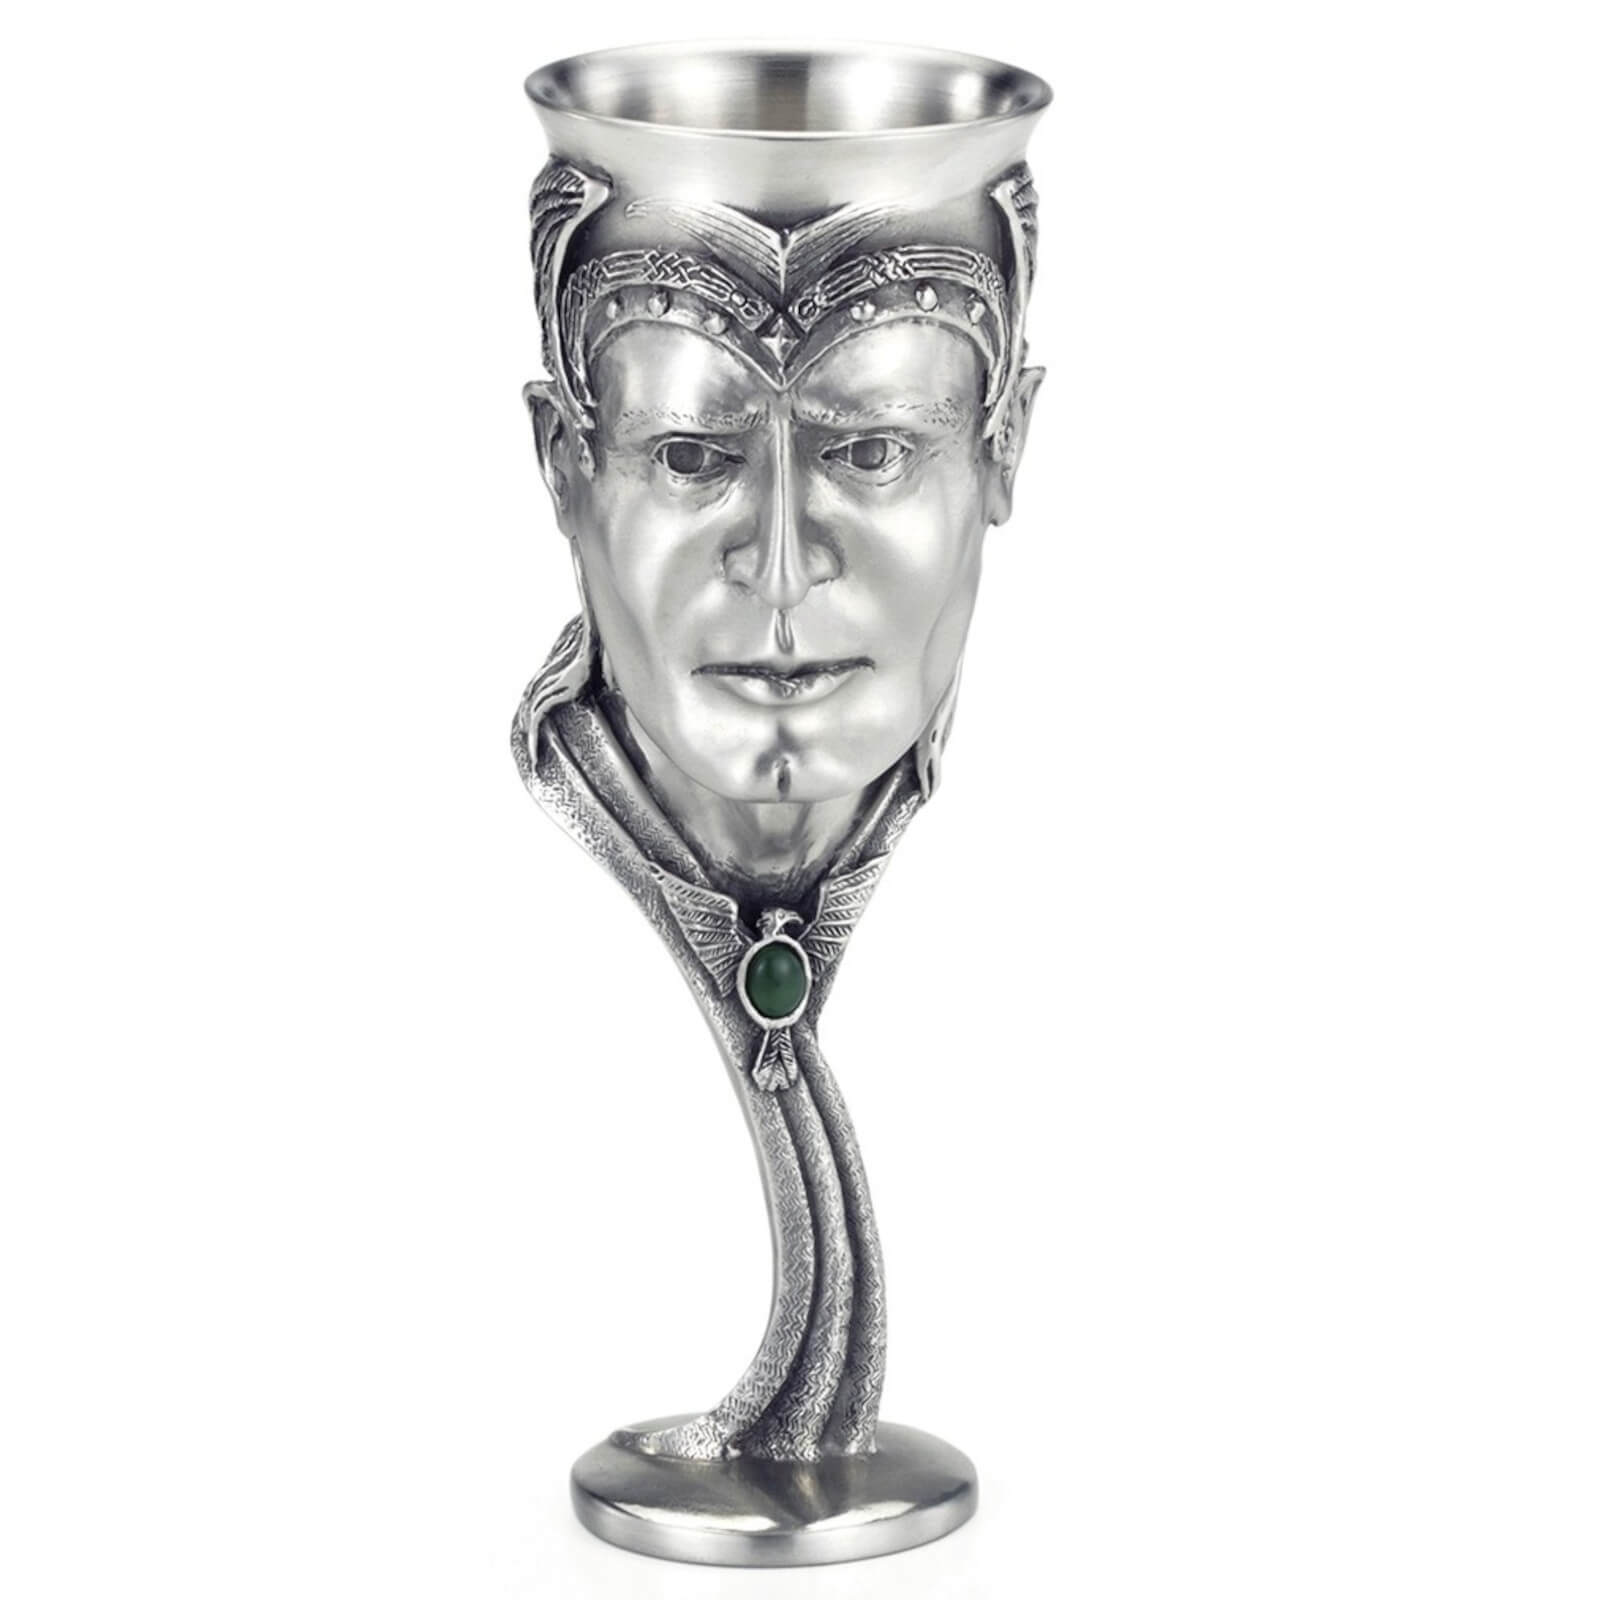 Image of Royal Selangor Lord of the Rings Pewter Goblet - Aragon